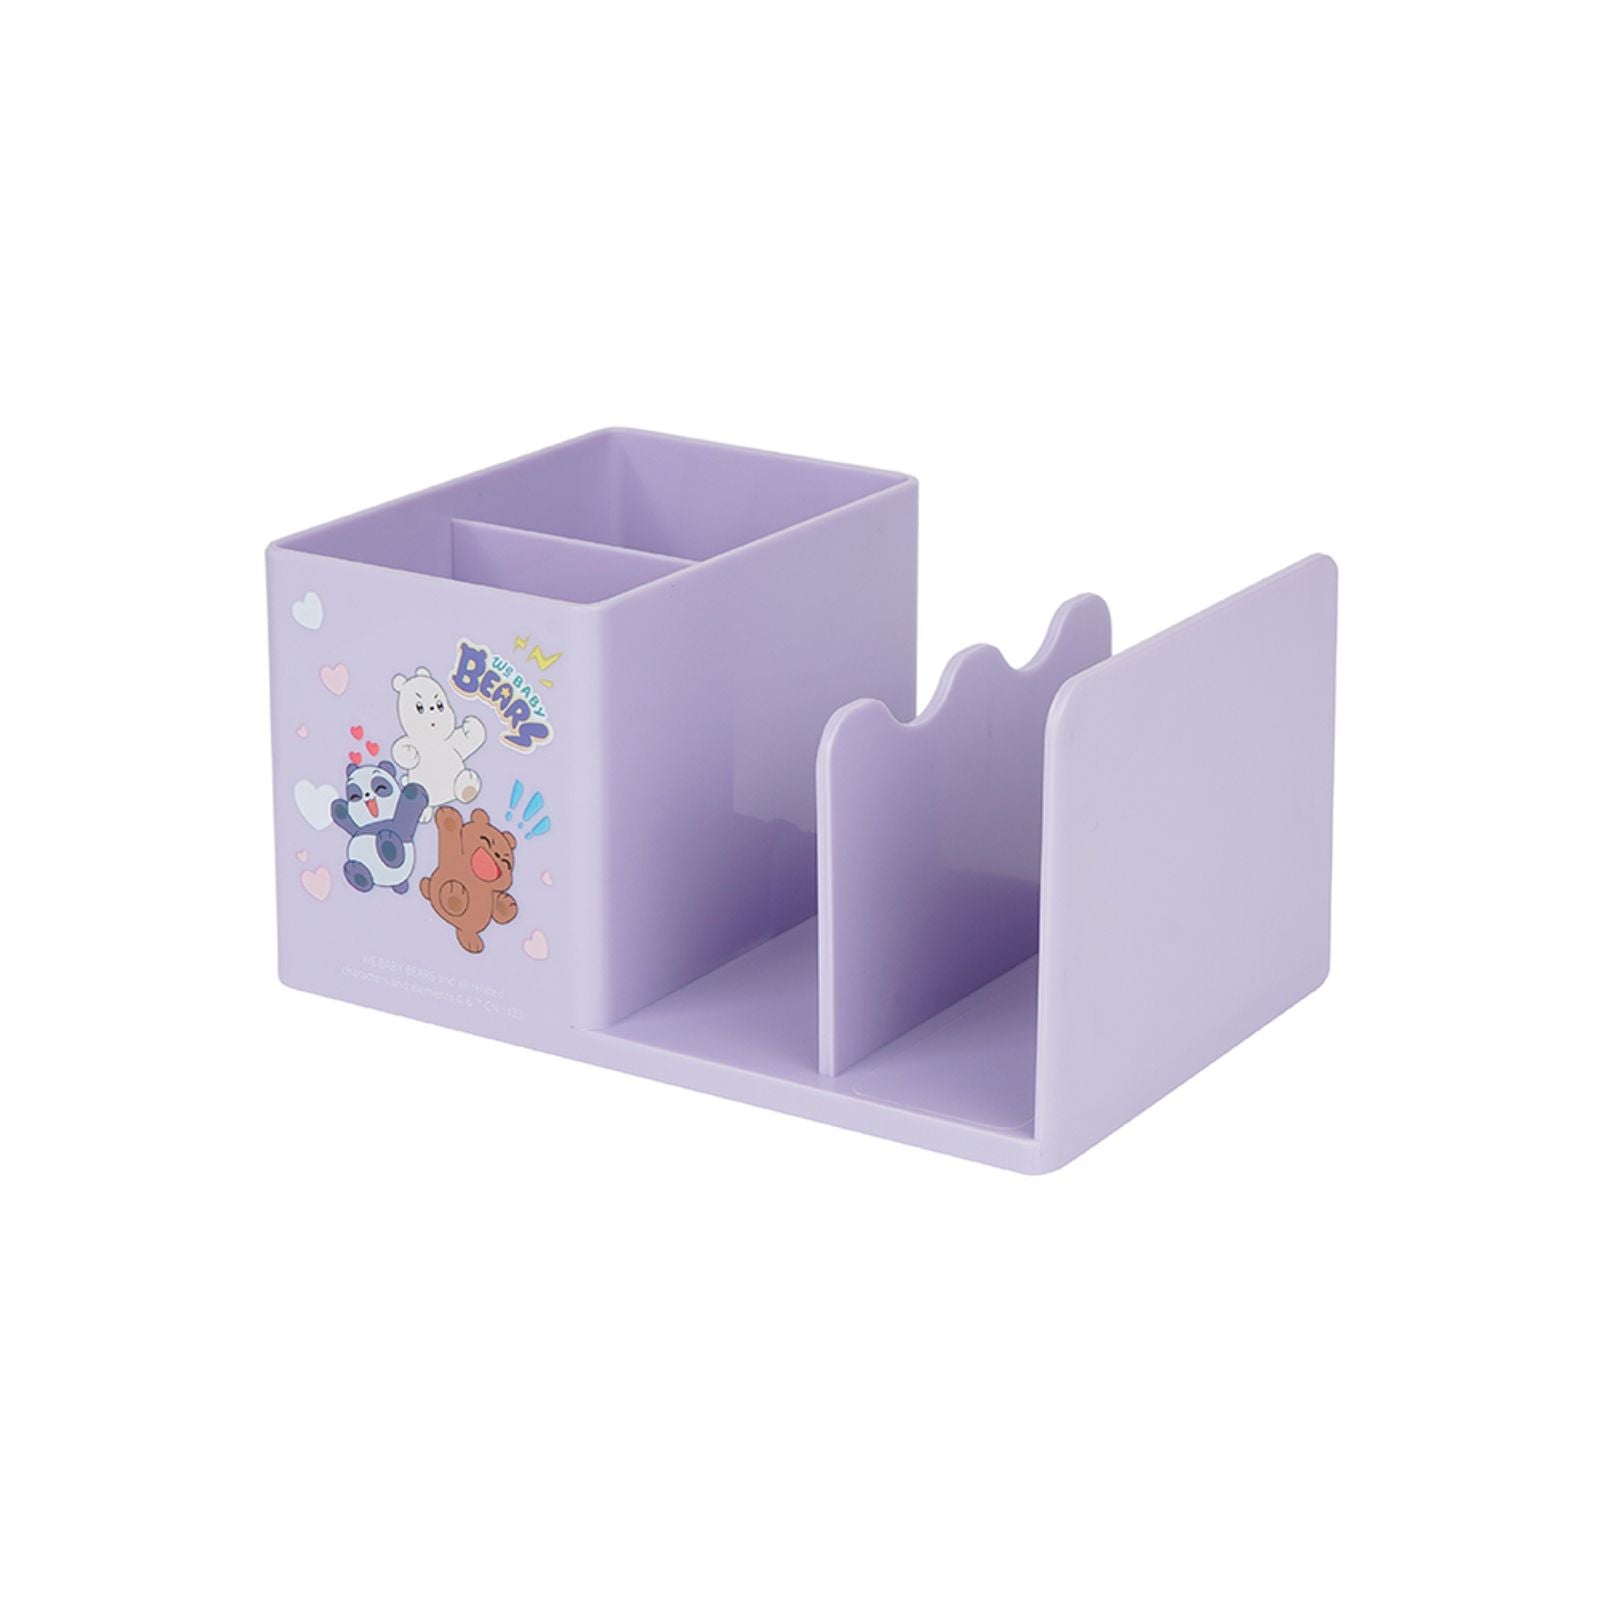 MINISO WE BABY BEARS COLLECTION ORGANIZER WITH PEN HOLDER AND BOOKSHELF 2014946610108 LIFE DEPARTMENT